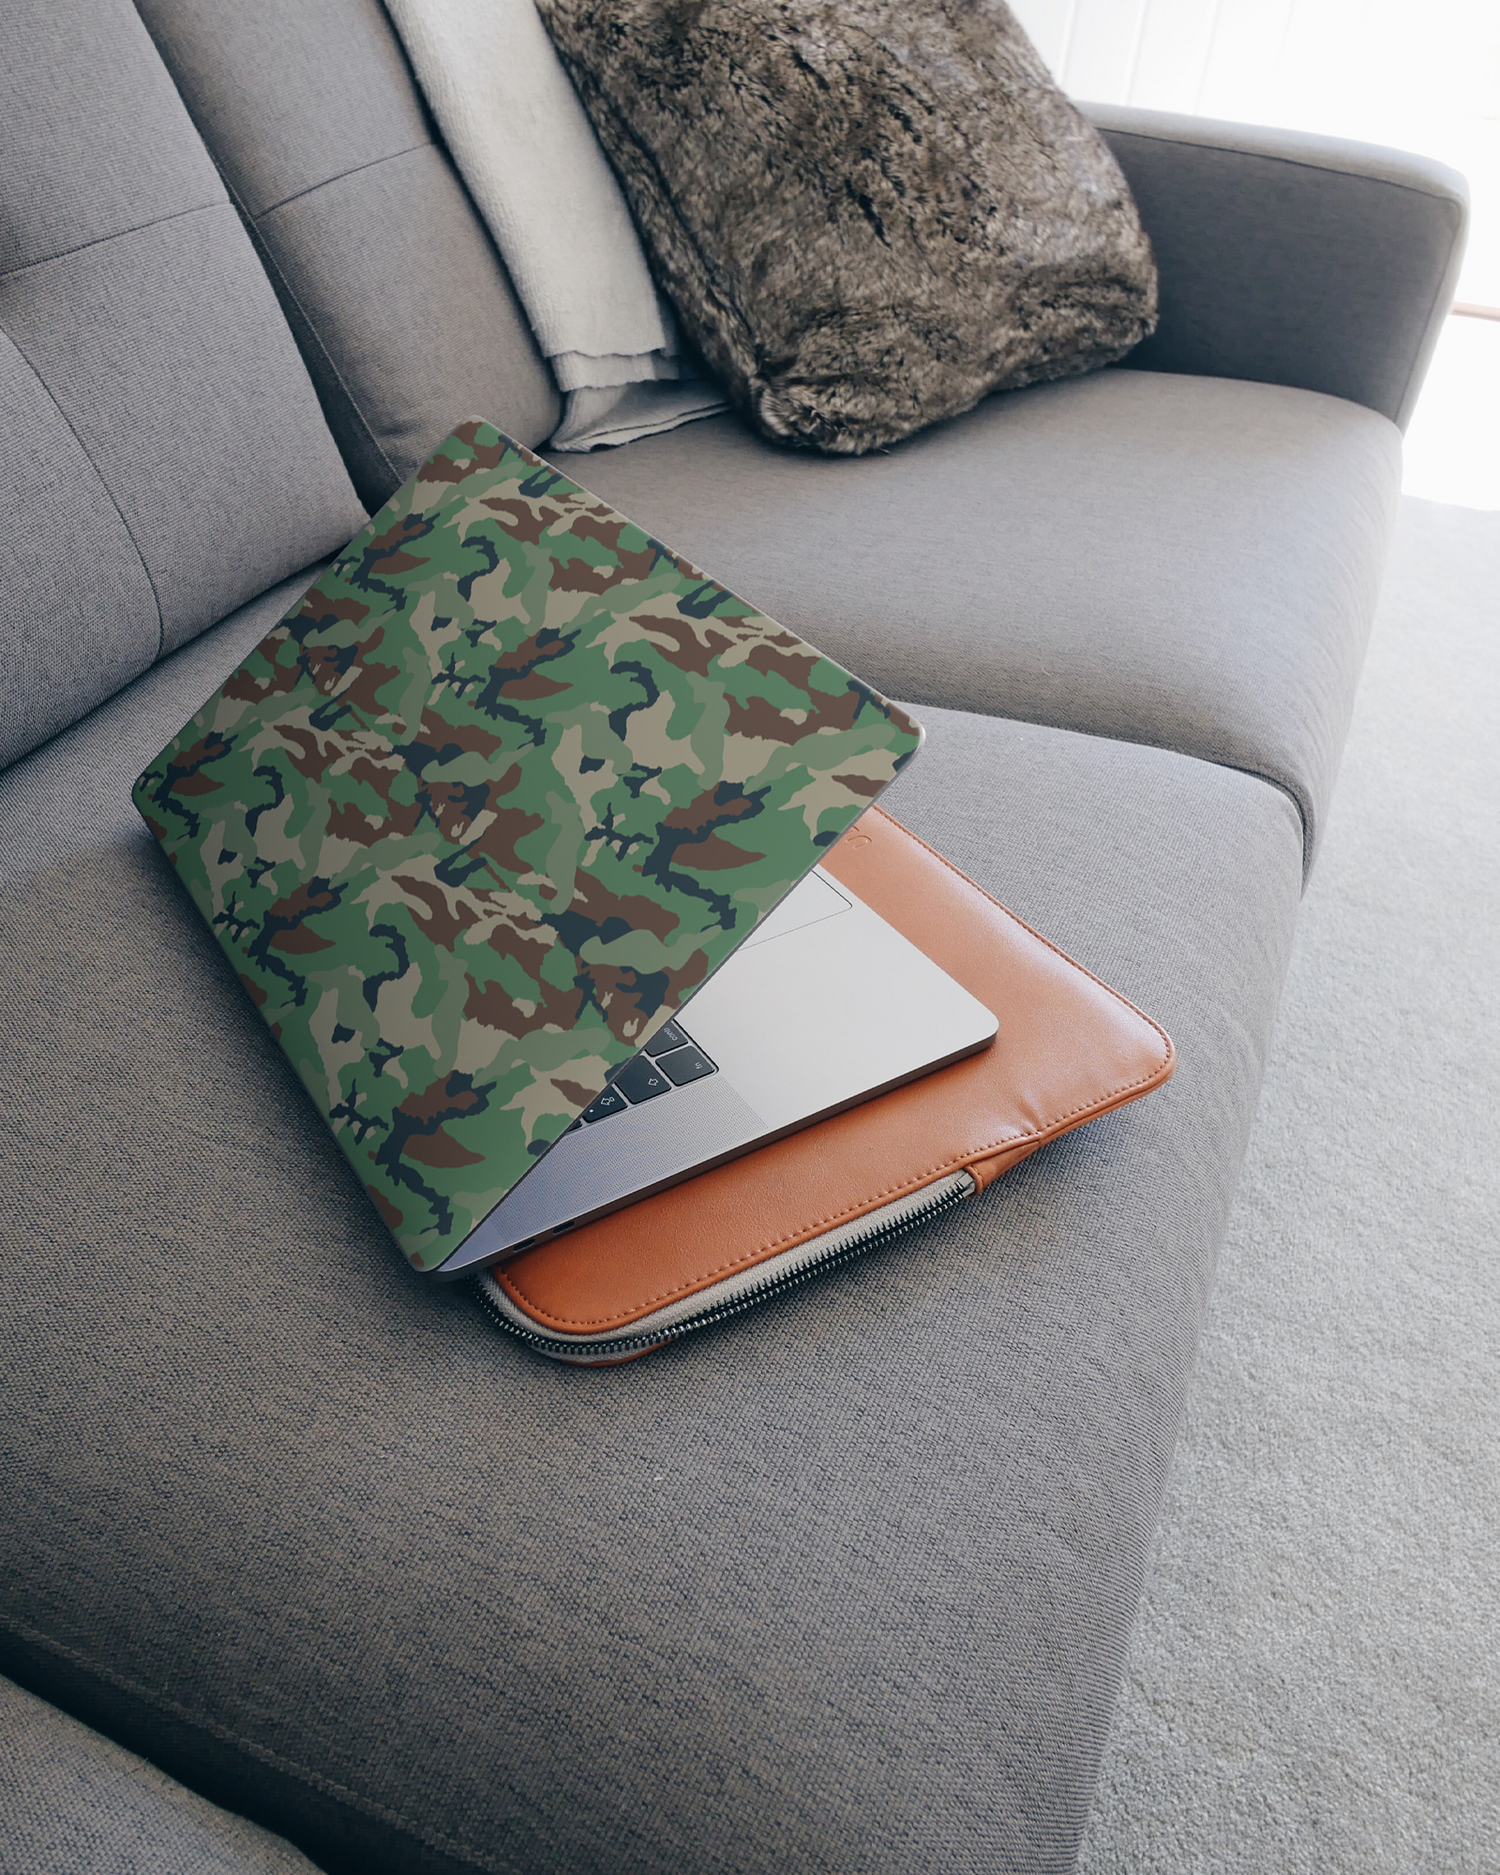 Green and Brown Camo Laptop Skin for 15 inch Apple MacBooks on a couch